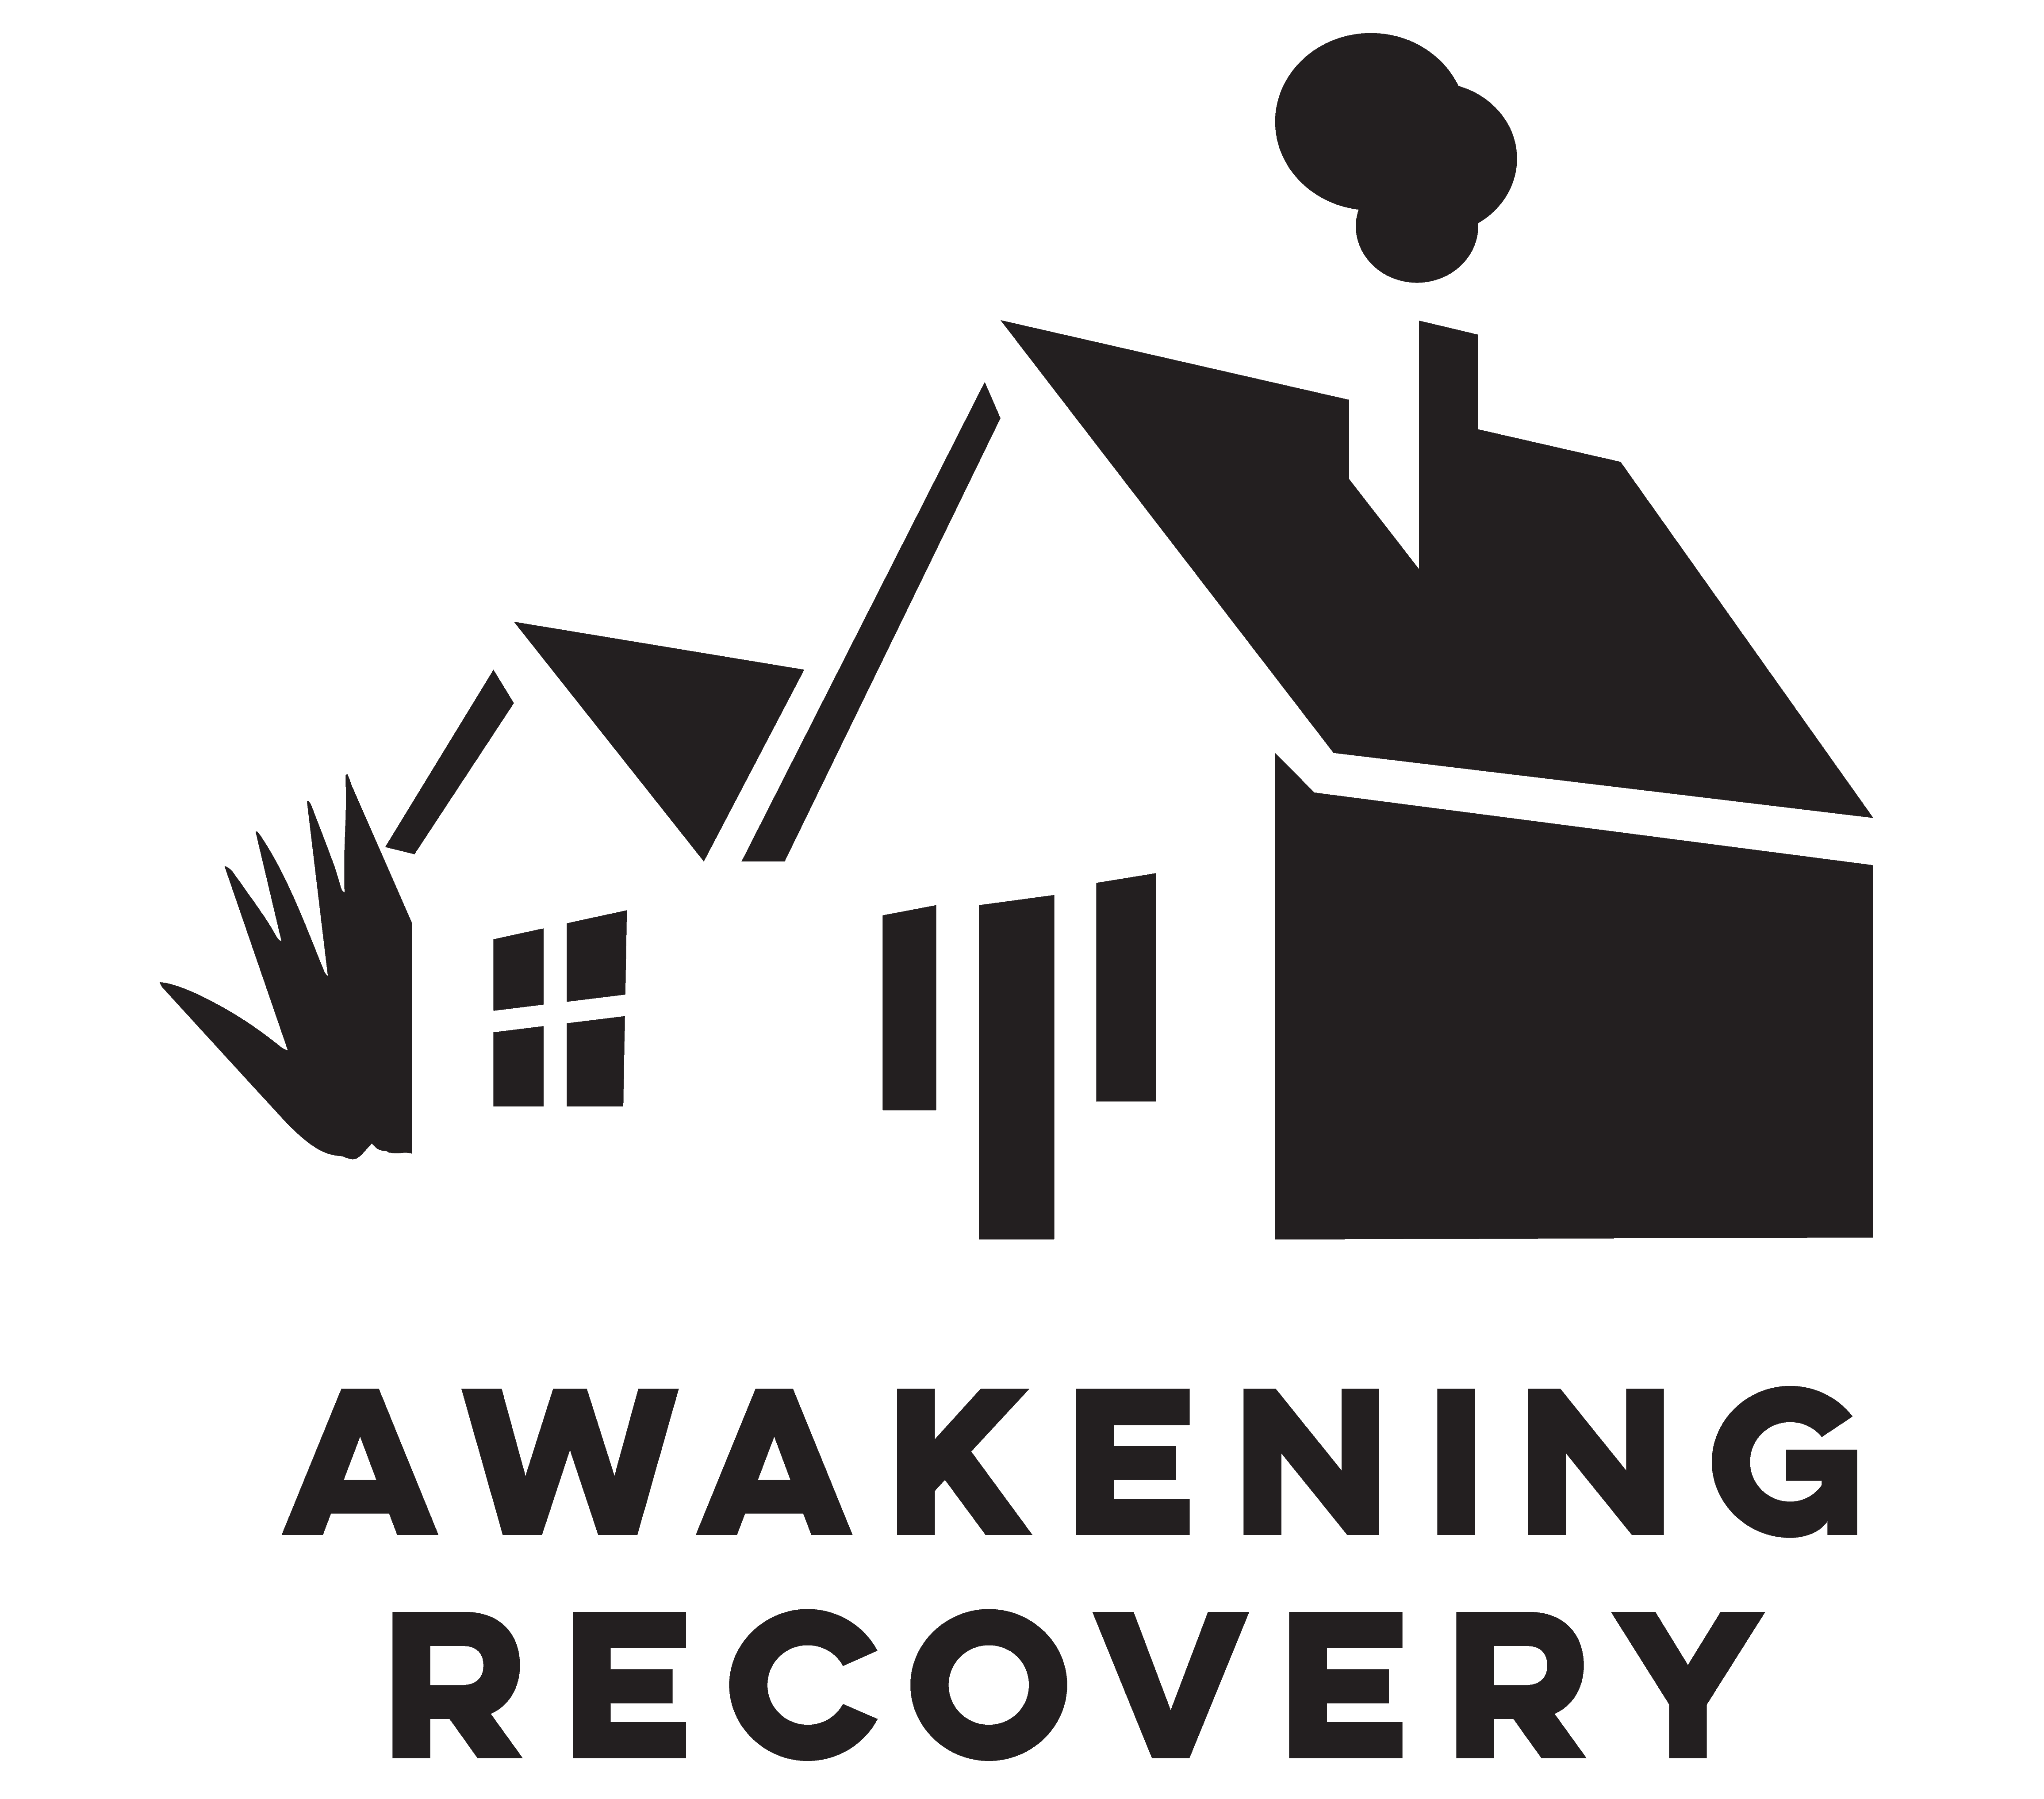 You are currently viewing Awakening Recovery 990 for 2021